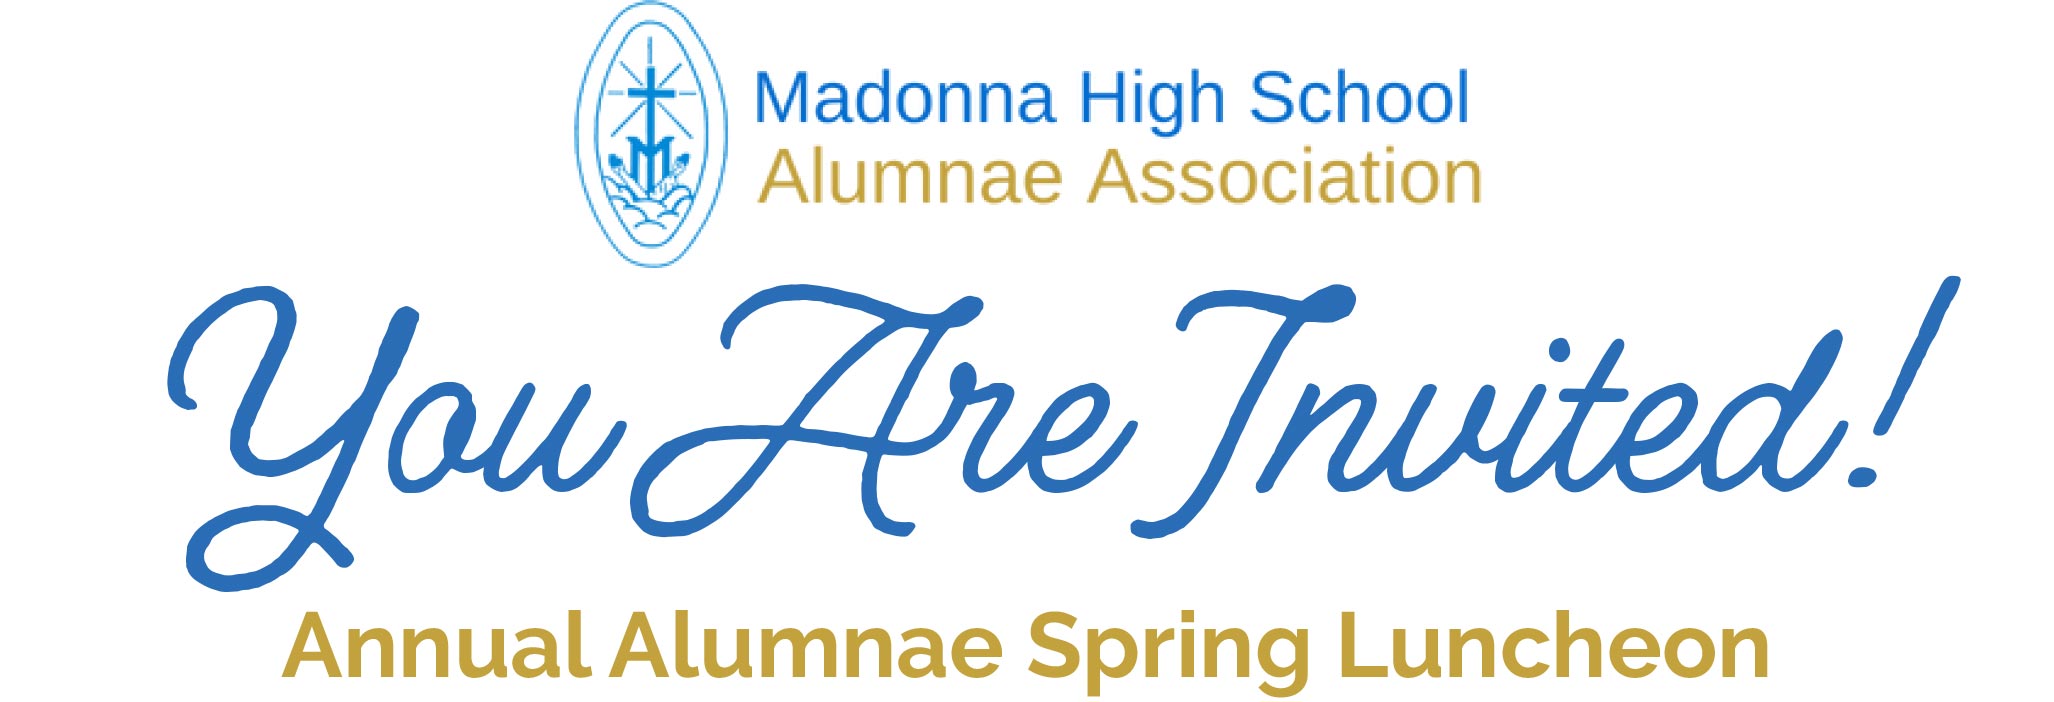 Annual Alumnae Spring Luncheon Event